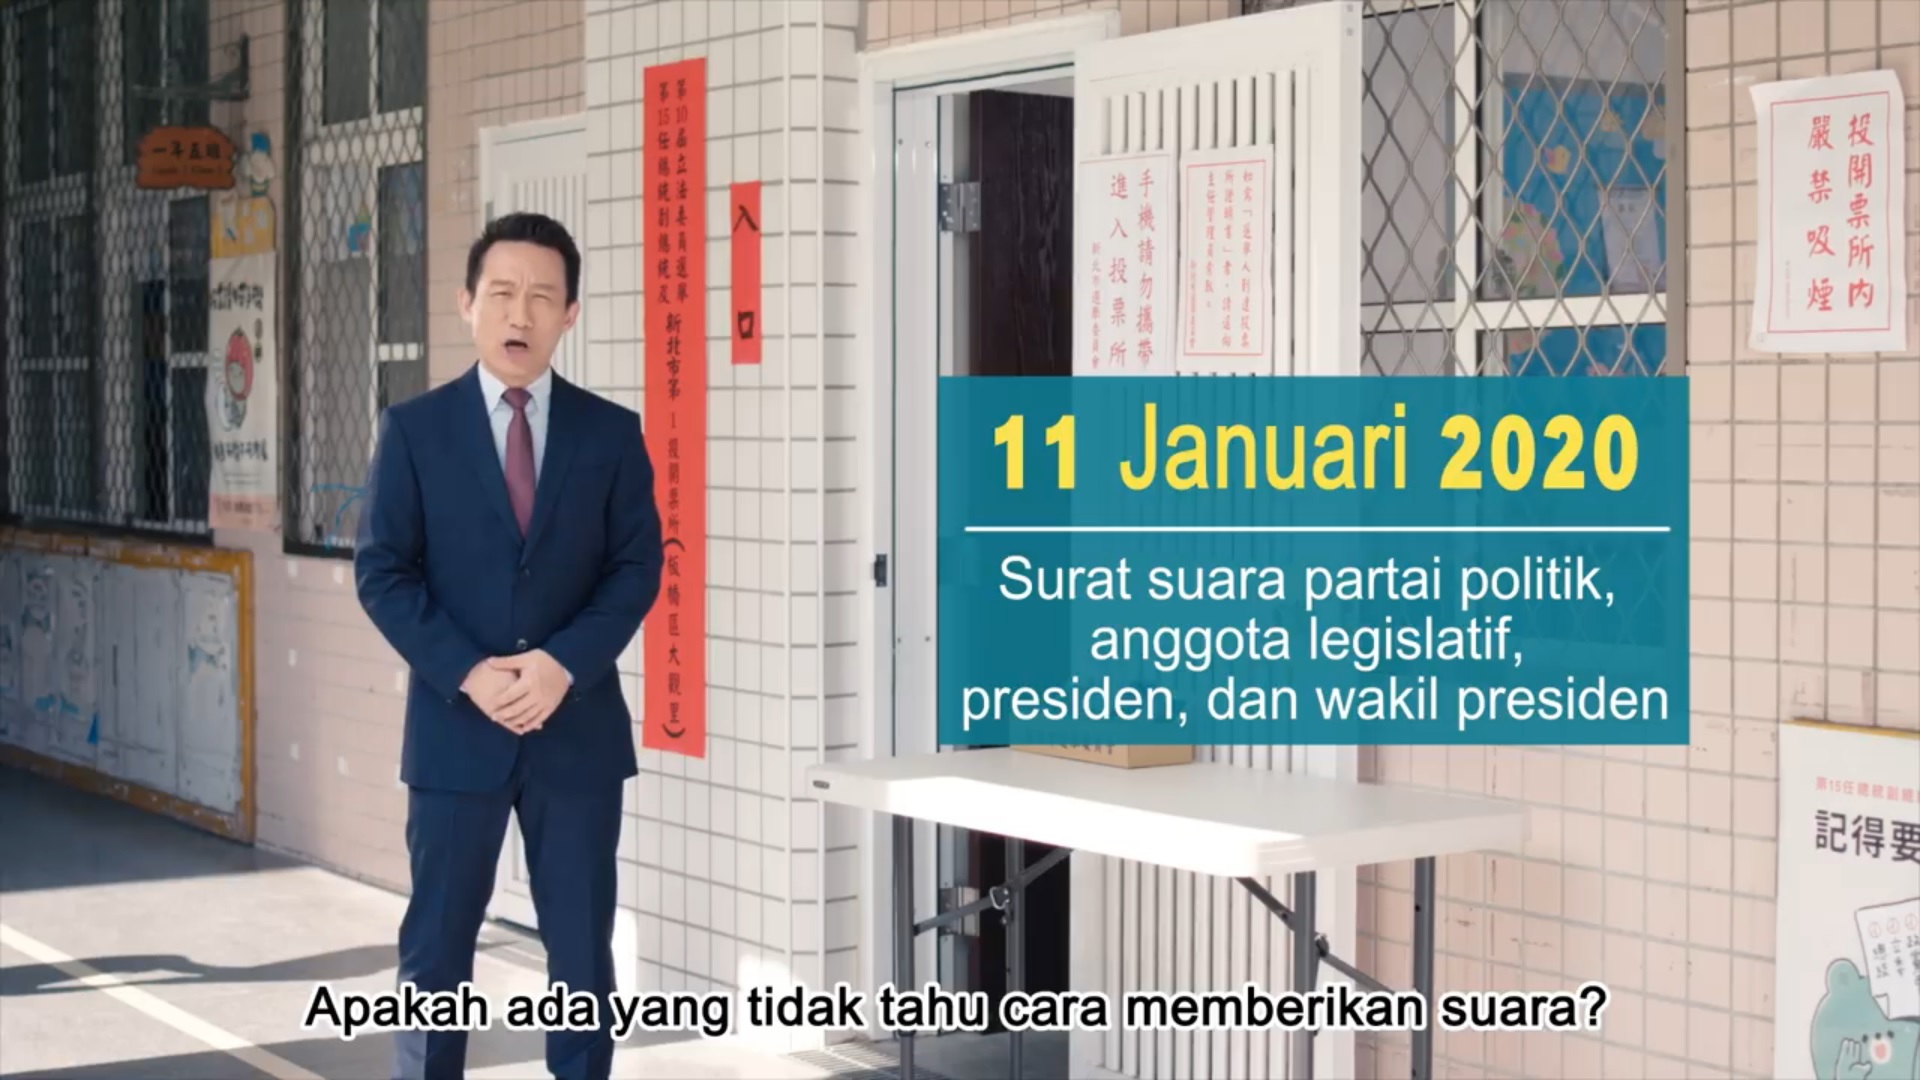 The Central Election Commission adds the subtitles of Vietnamese, Indonesian, Thai, Cambodian, and English into the promotional video. Photograph: Central Election Commission's Faccebook page.